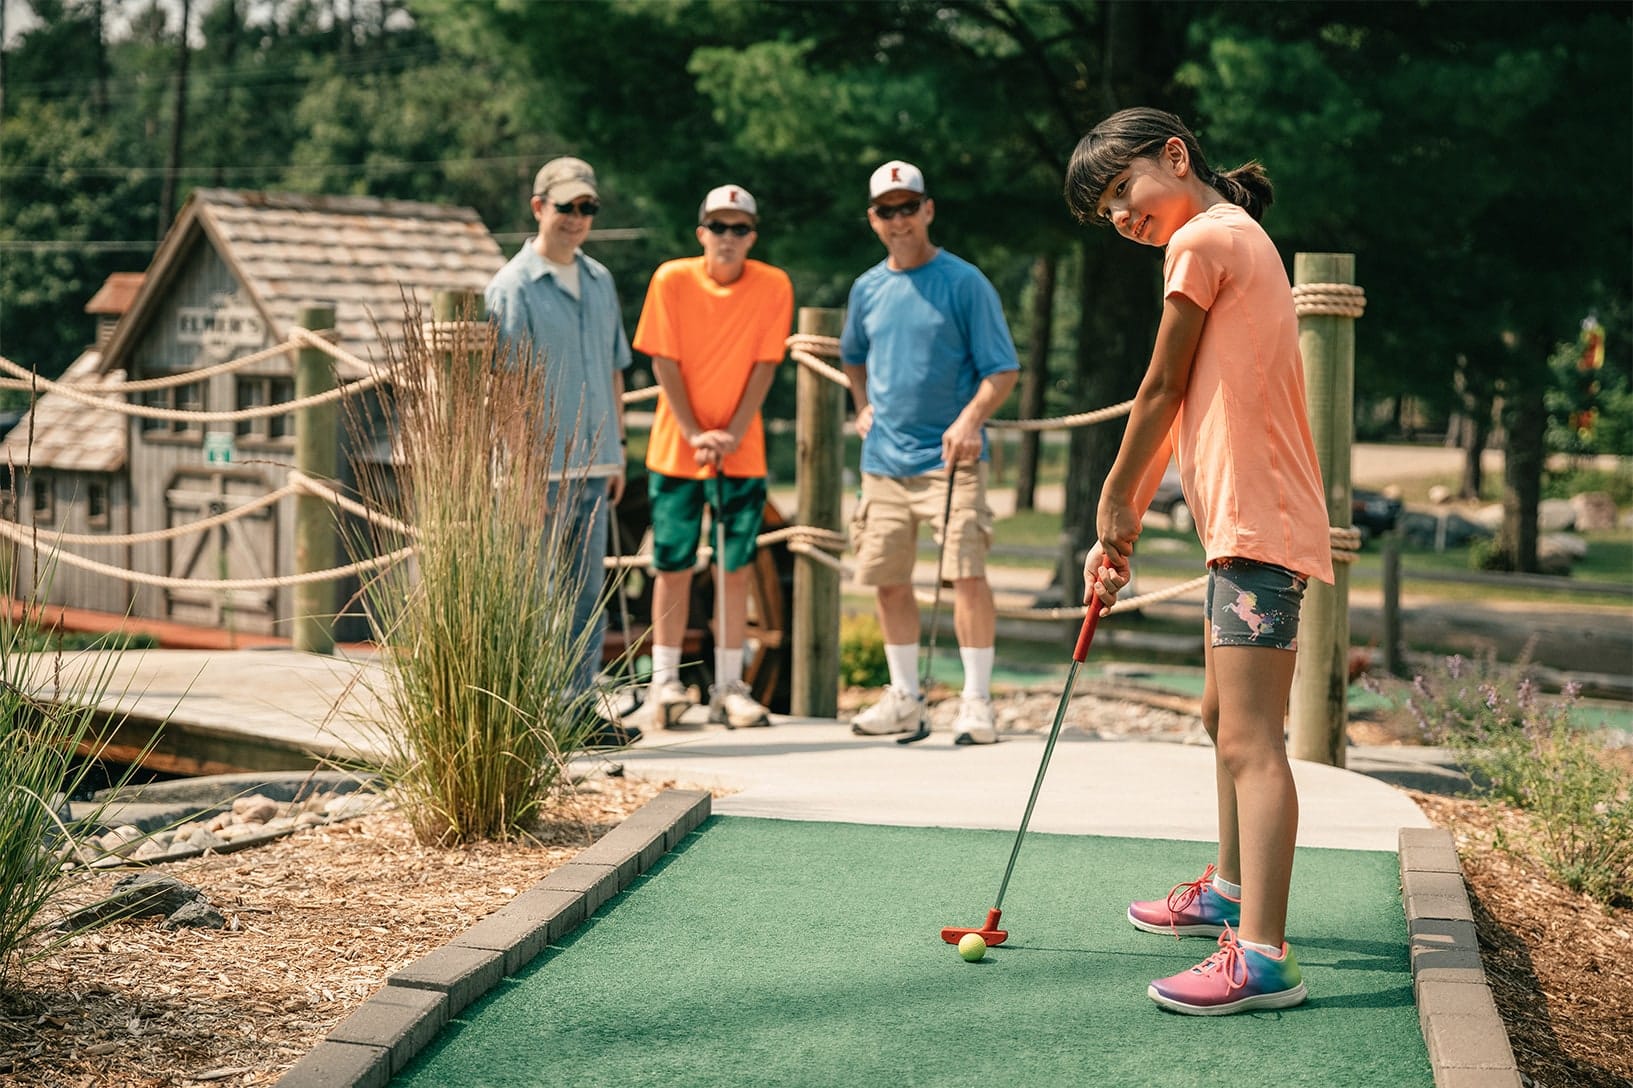 A young girl in shorts and a t-shirt plays mini-golf, preparing to putt the ball, while three people stand and watch in the background. The setting is an outdoor mini-golf course with greenery.